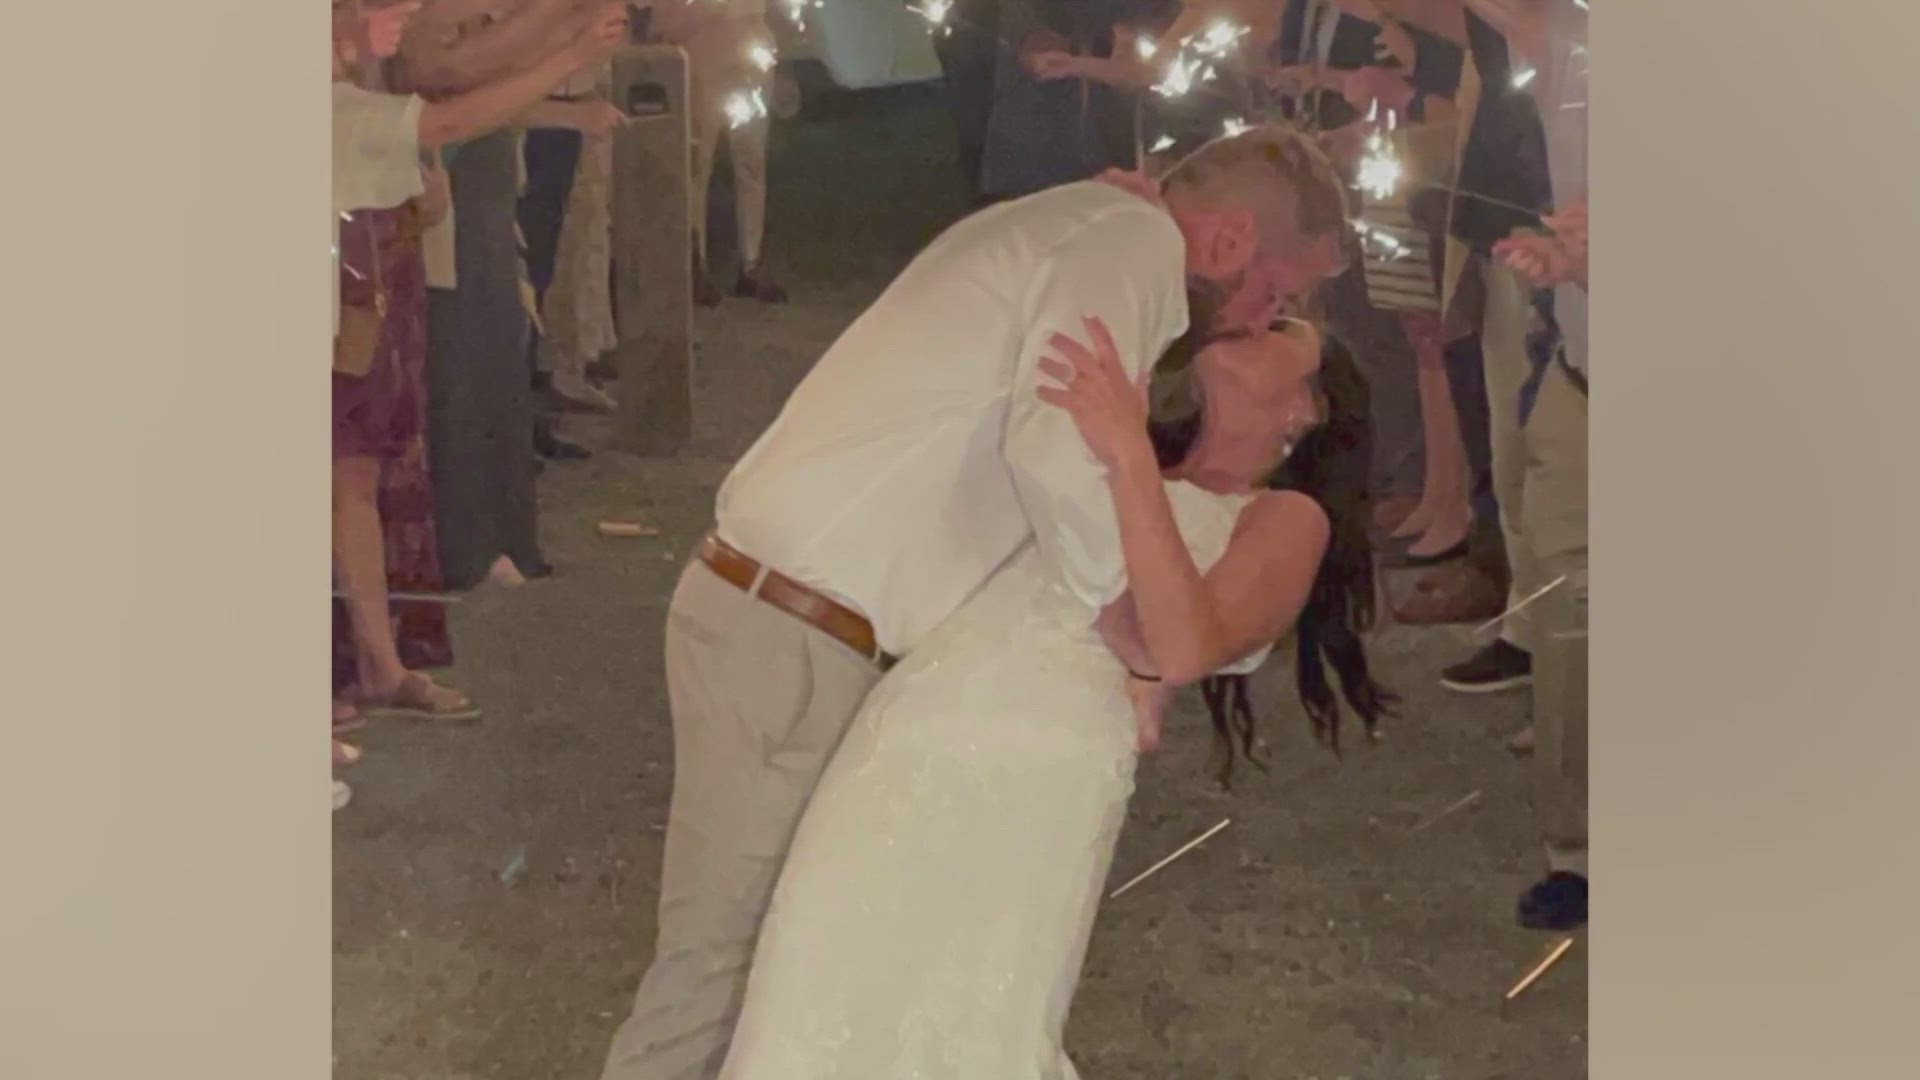 A new bride was killed and her husband seriously injured when a suspected drunk driver crashed into them just hours after their wedding.